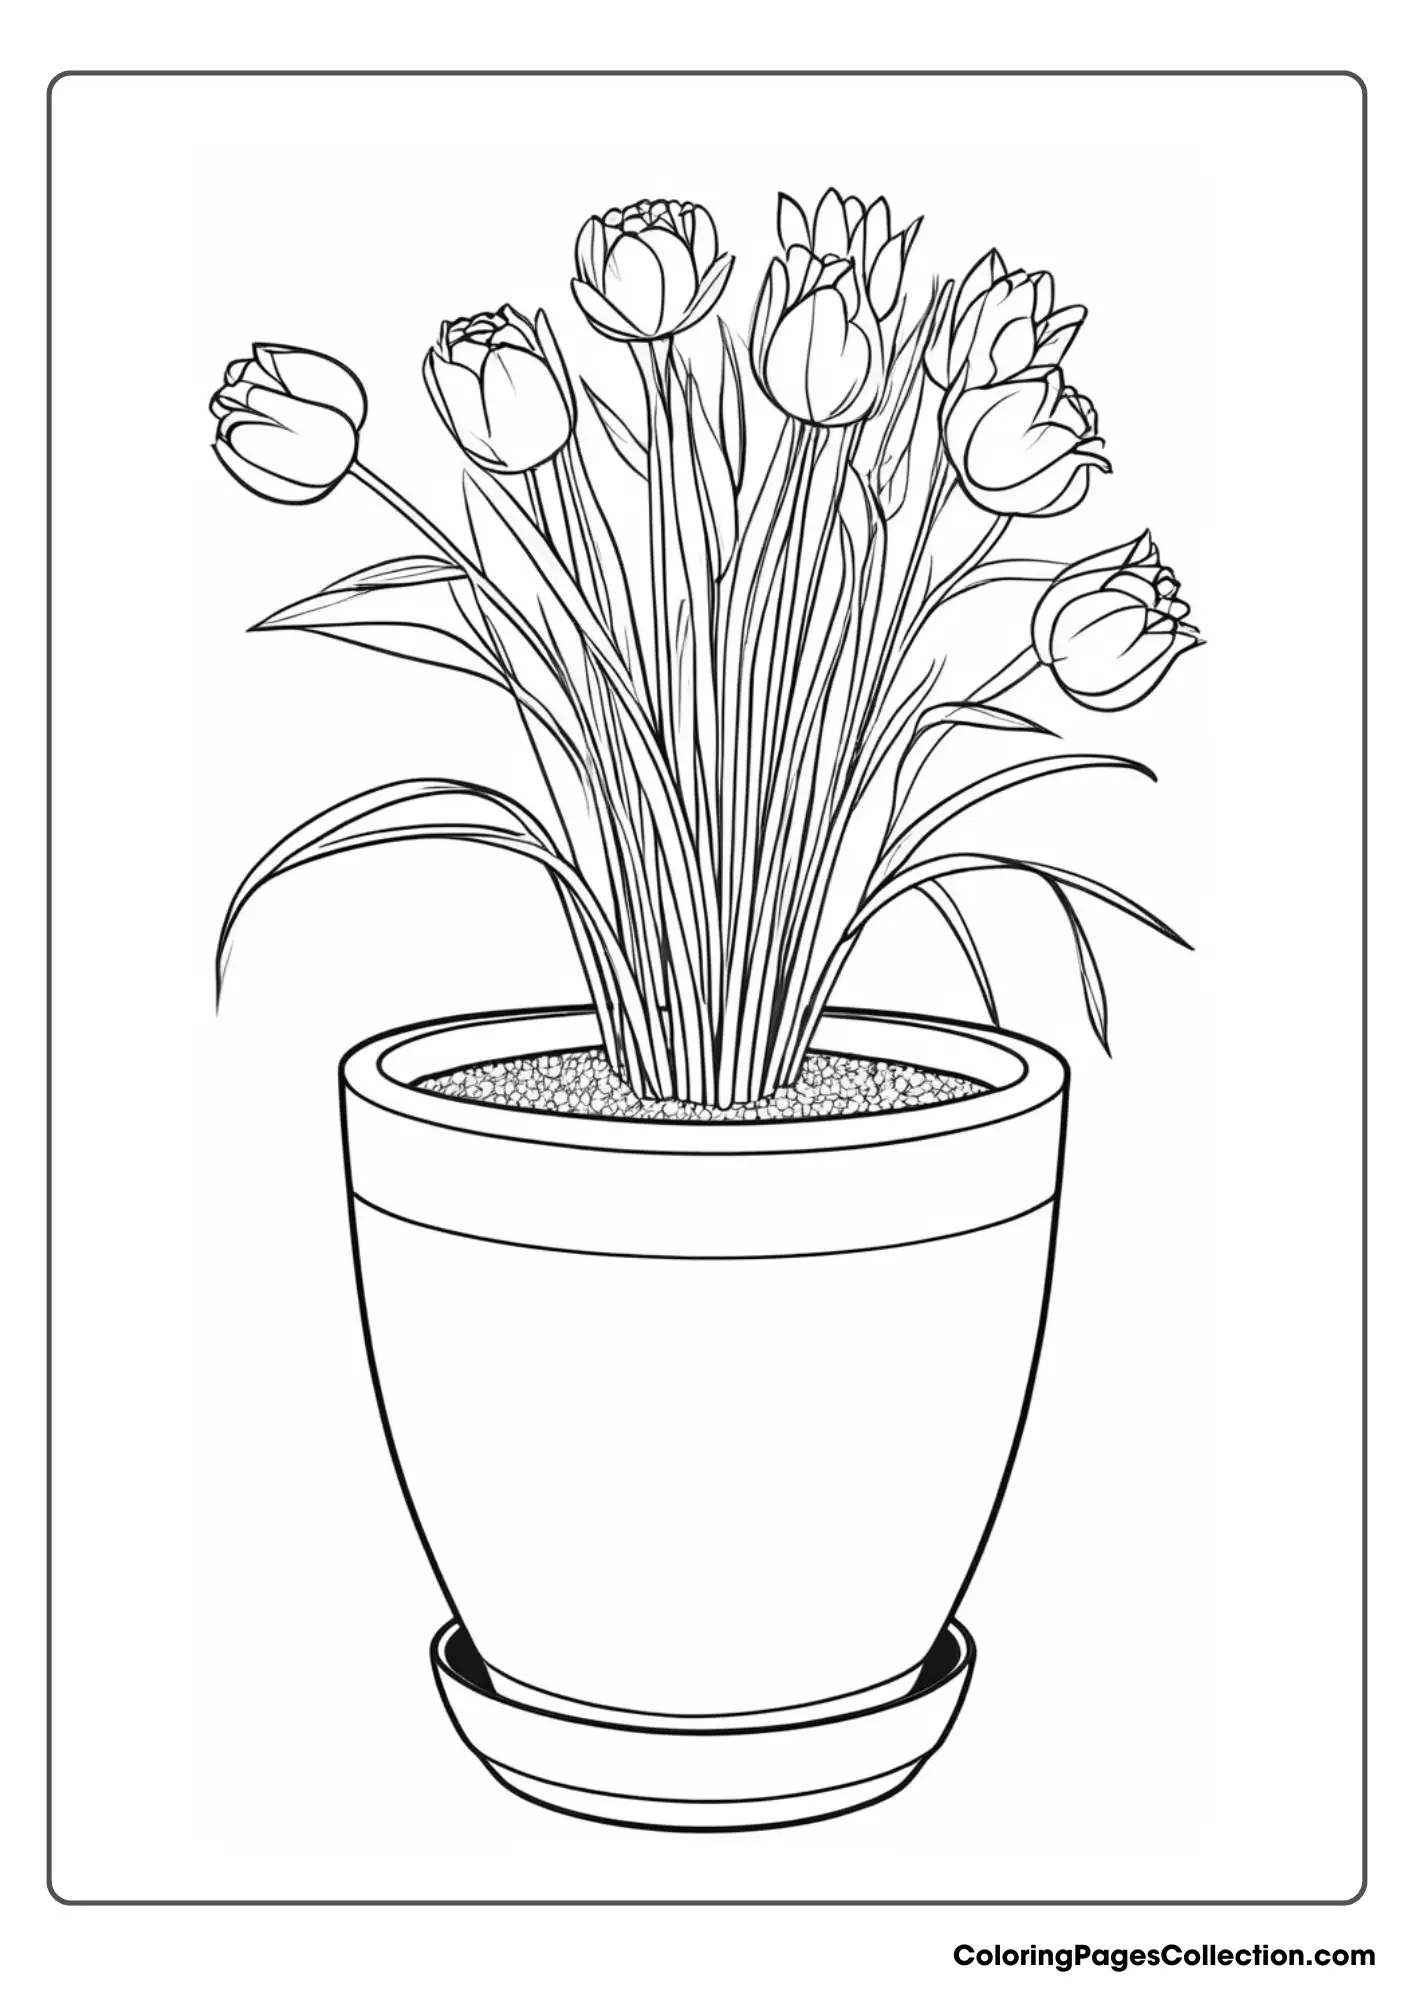 Tulips In A Pot Coloring Page